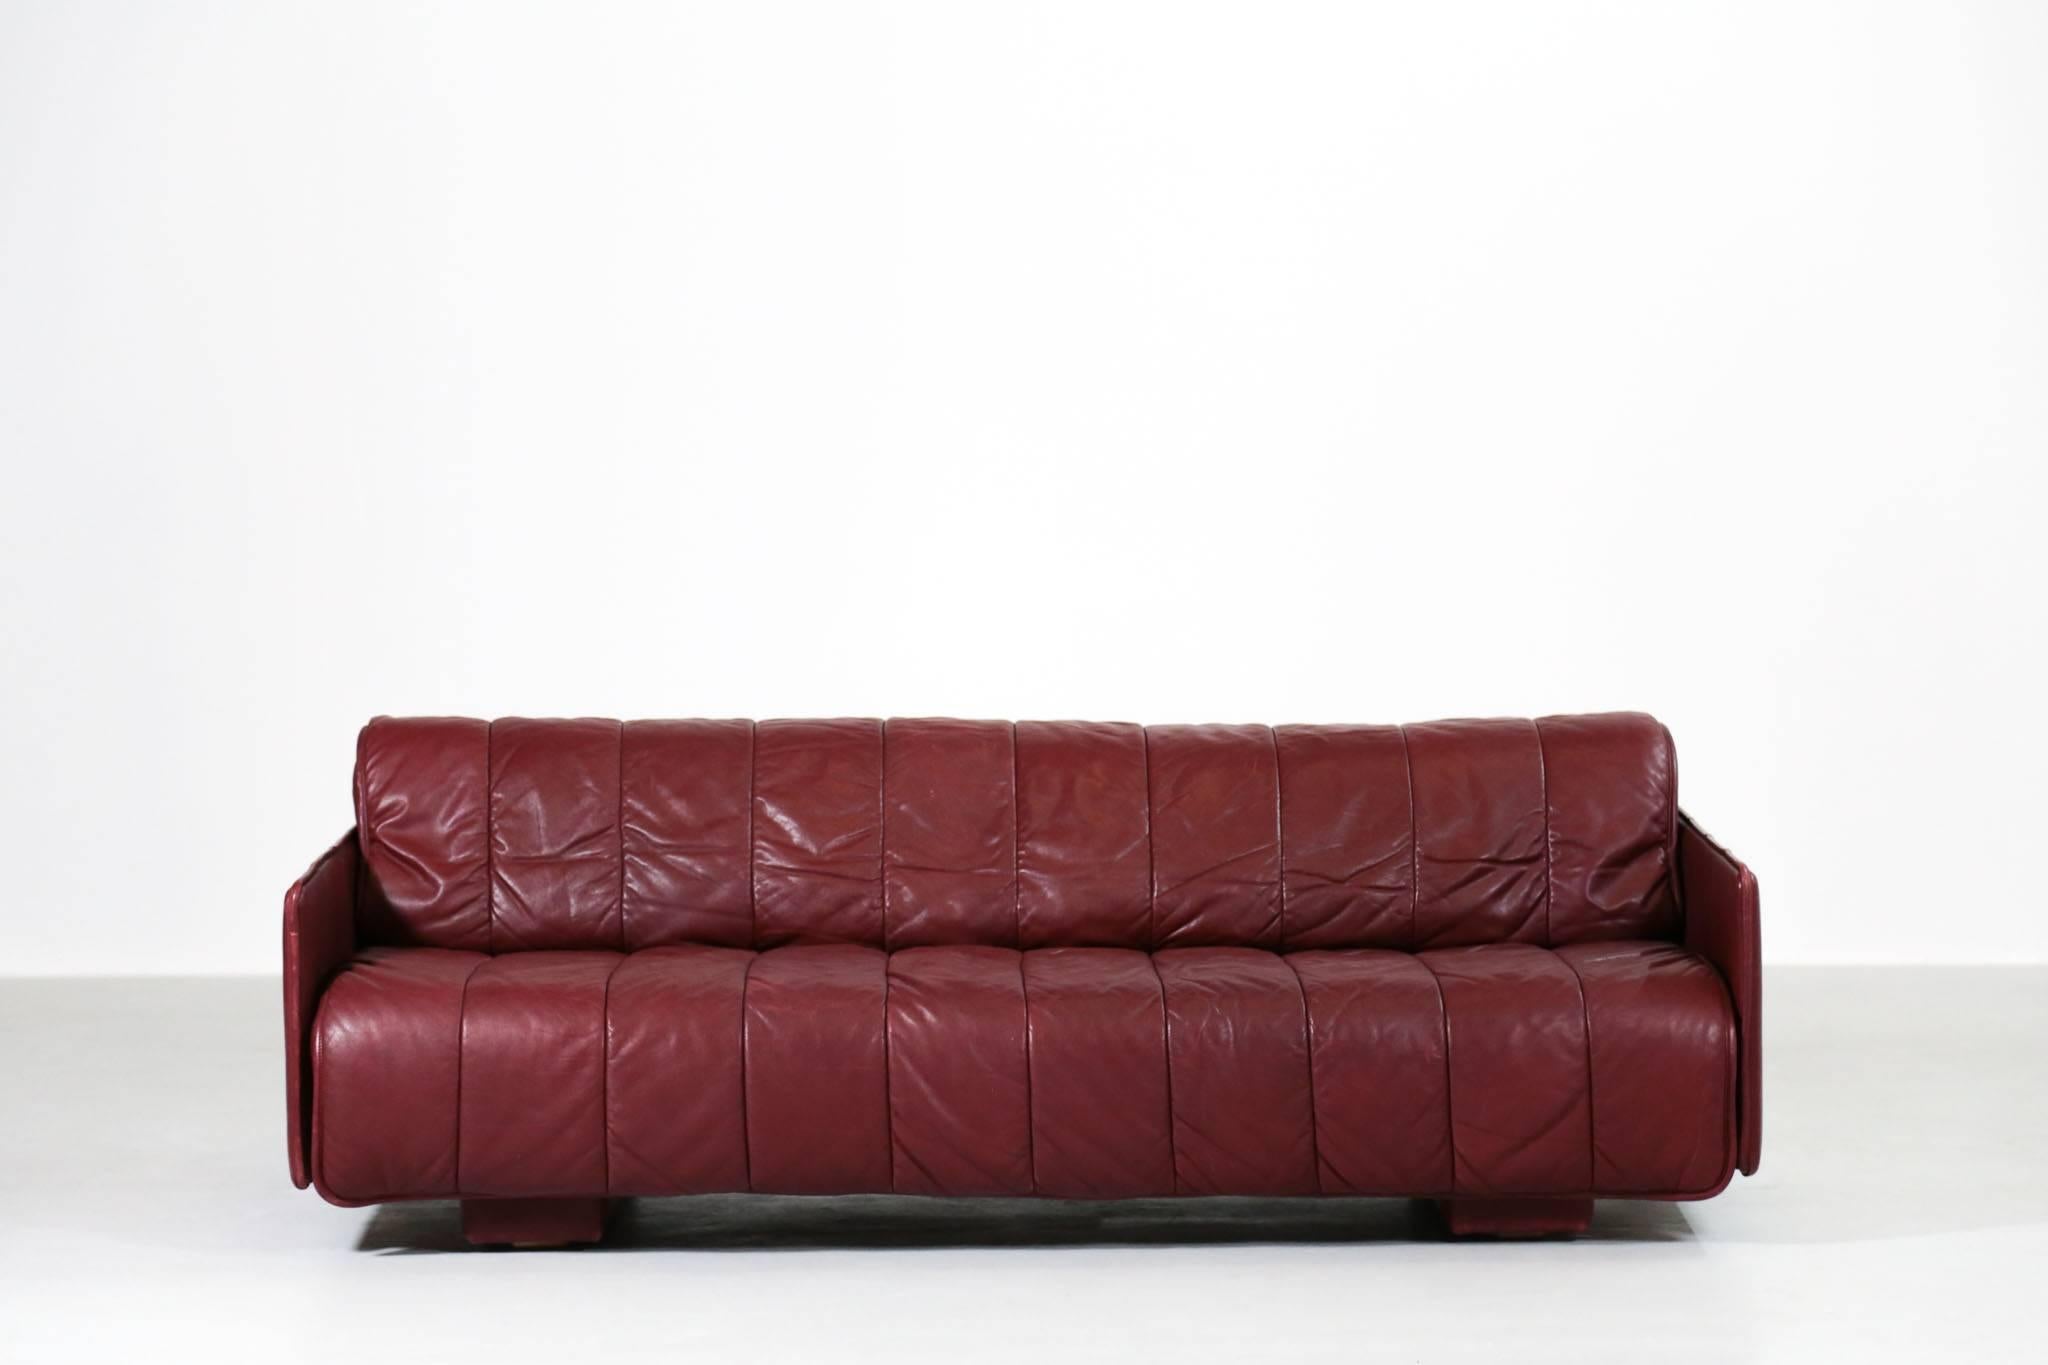 Convertible sofa bed made by De Sede in Switzerland.
High quality leather.